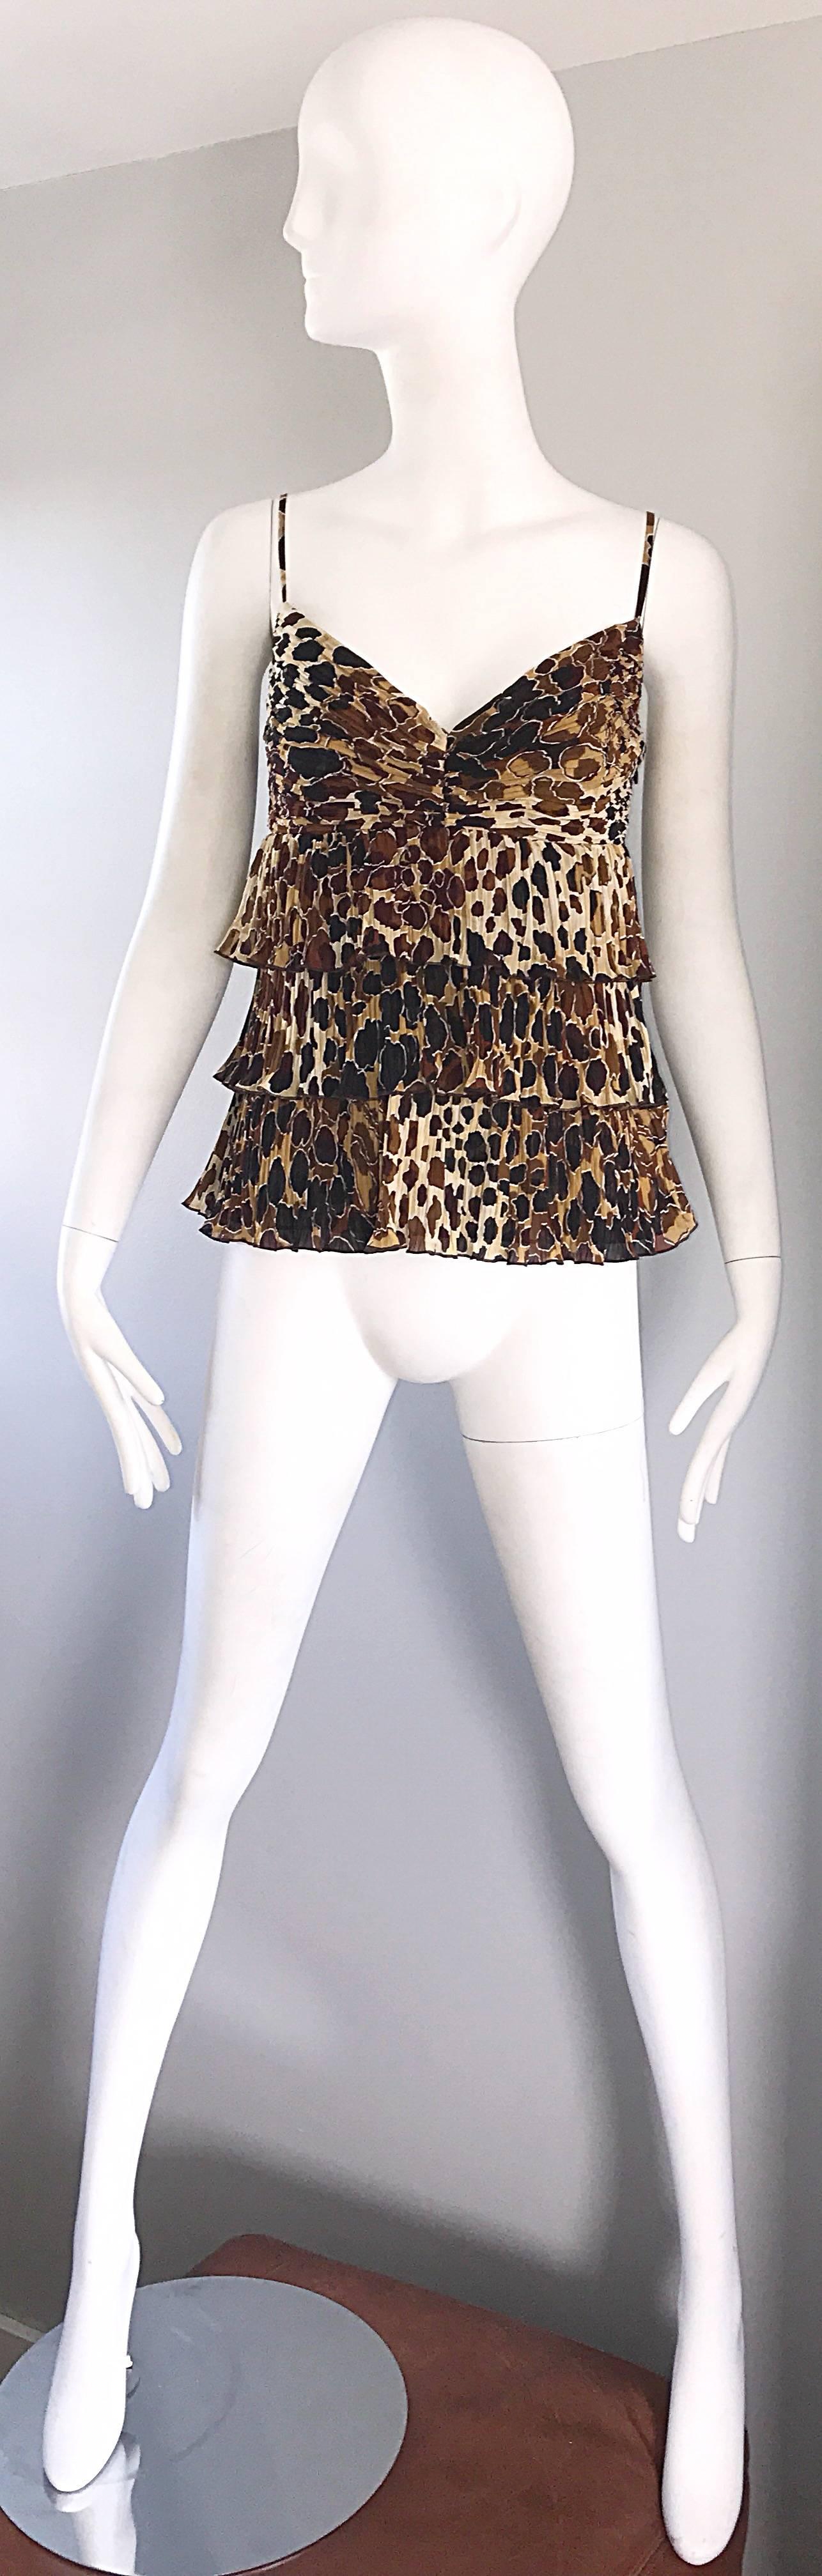 Chic new ESCADA leopard / cheetah print silk tiered pleated empire top! Three tiers, with accordian pleated silk. Beautiful leopard print in brown, beige, tan, light brown and black. Hidden zipper up the side with hook-and-eye closure. Excellent